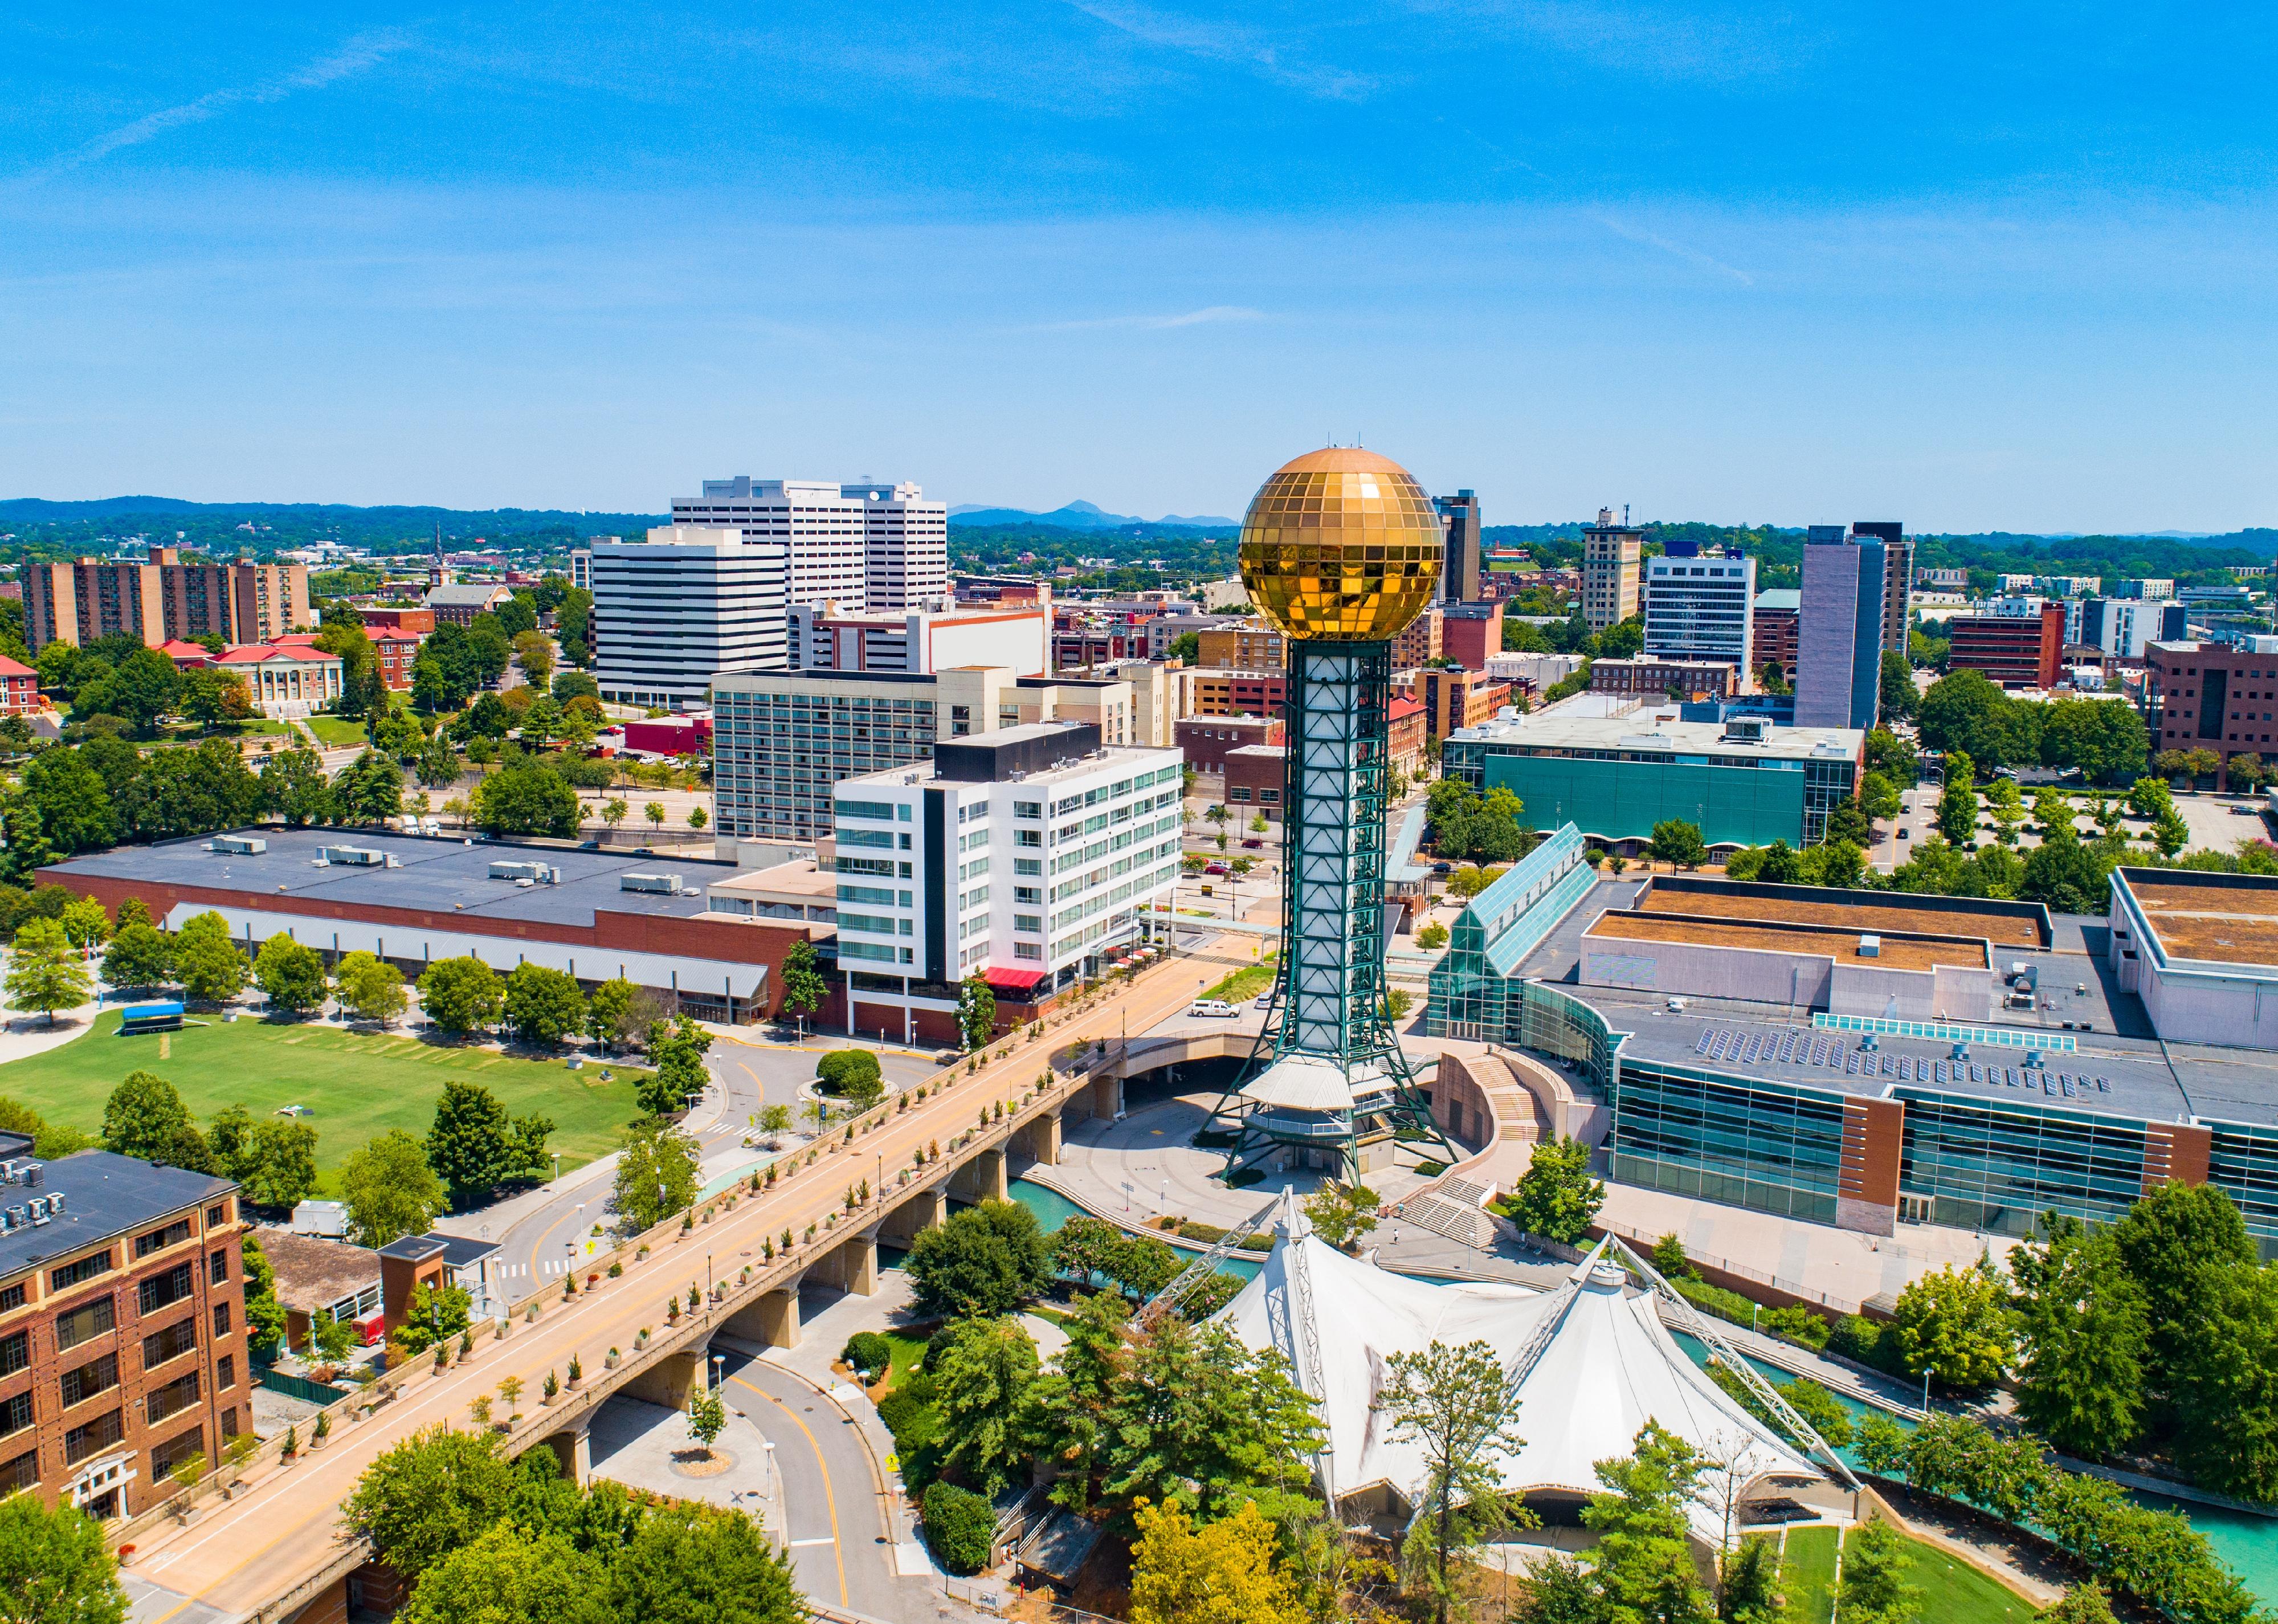 Downtown Knoxville aerial view of skyline.